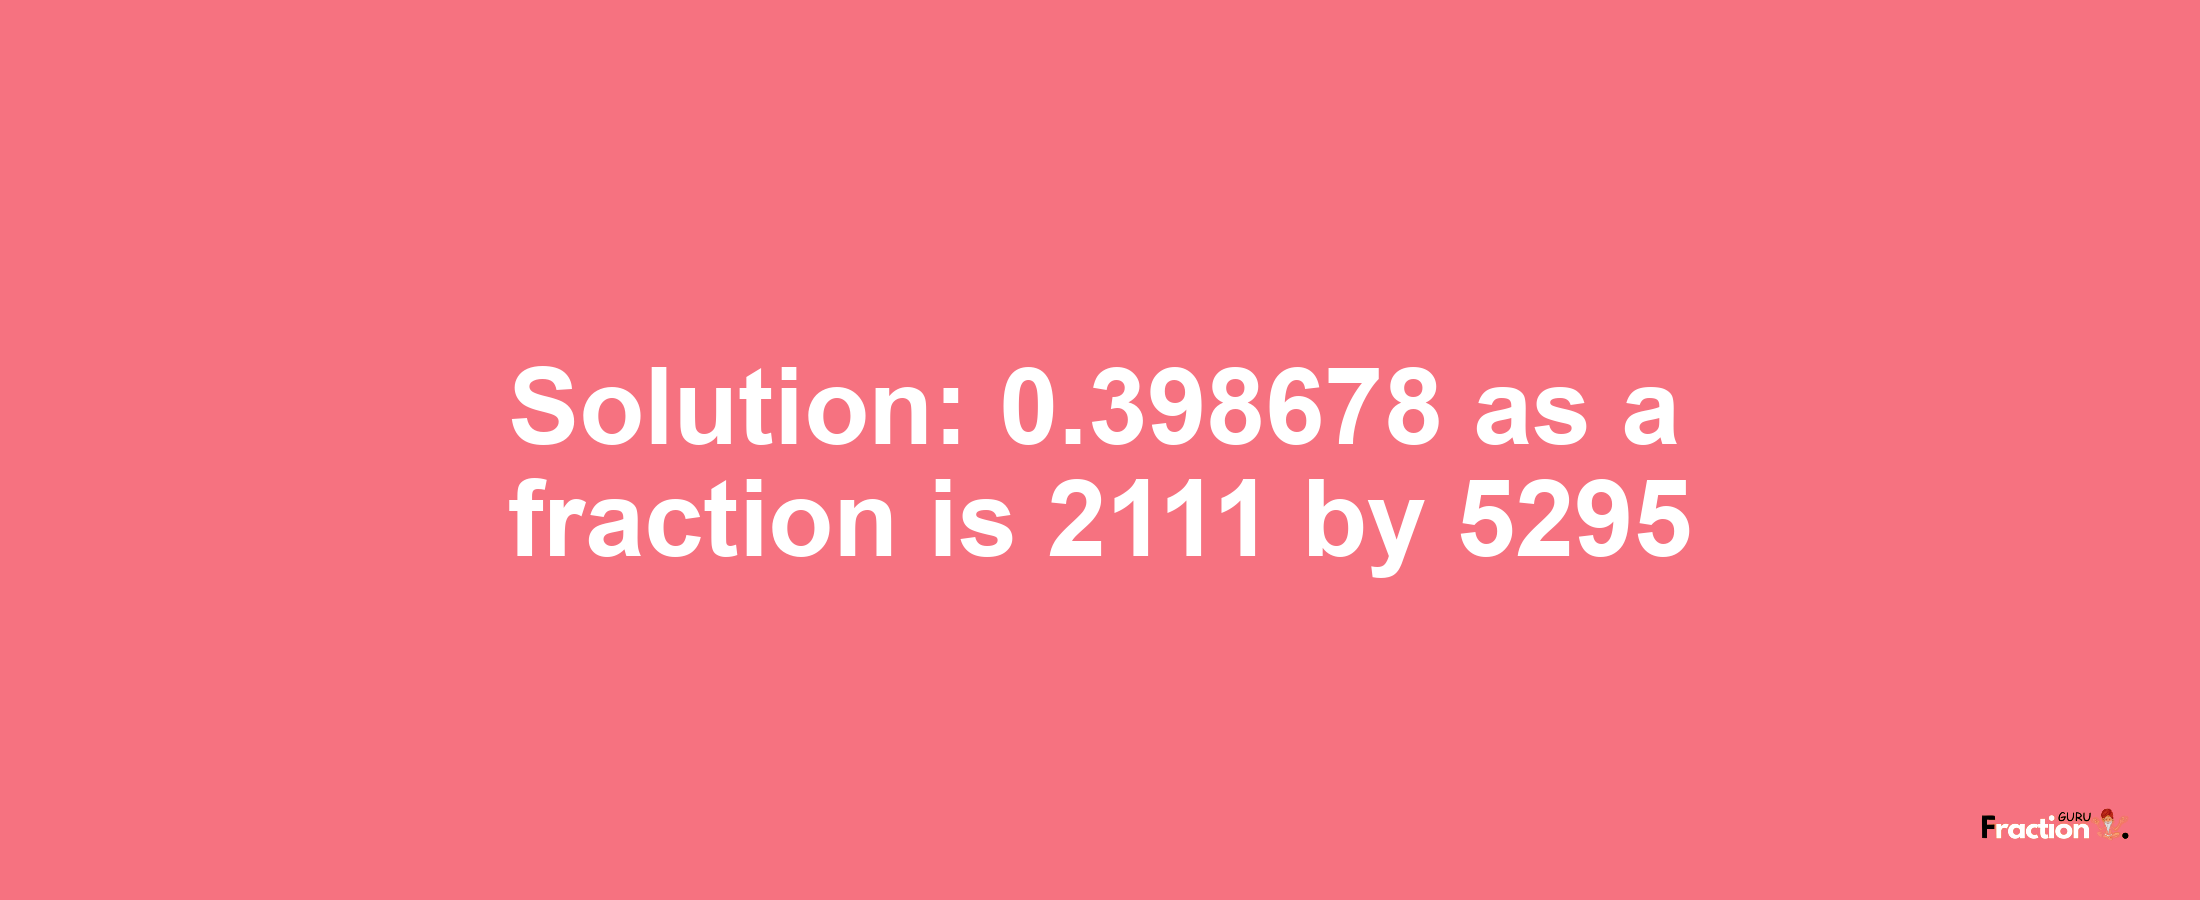 Solution:0.398678 as a fraction is 2111/5295